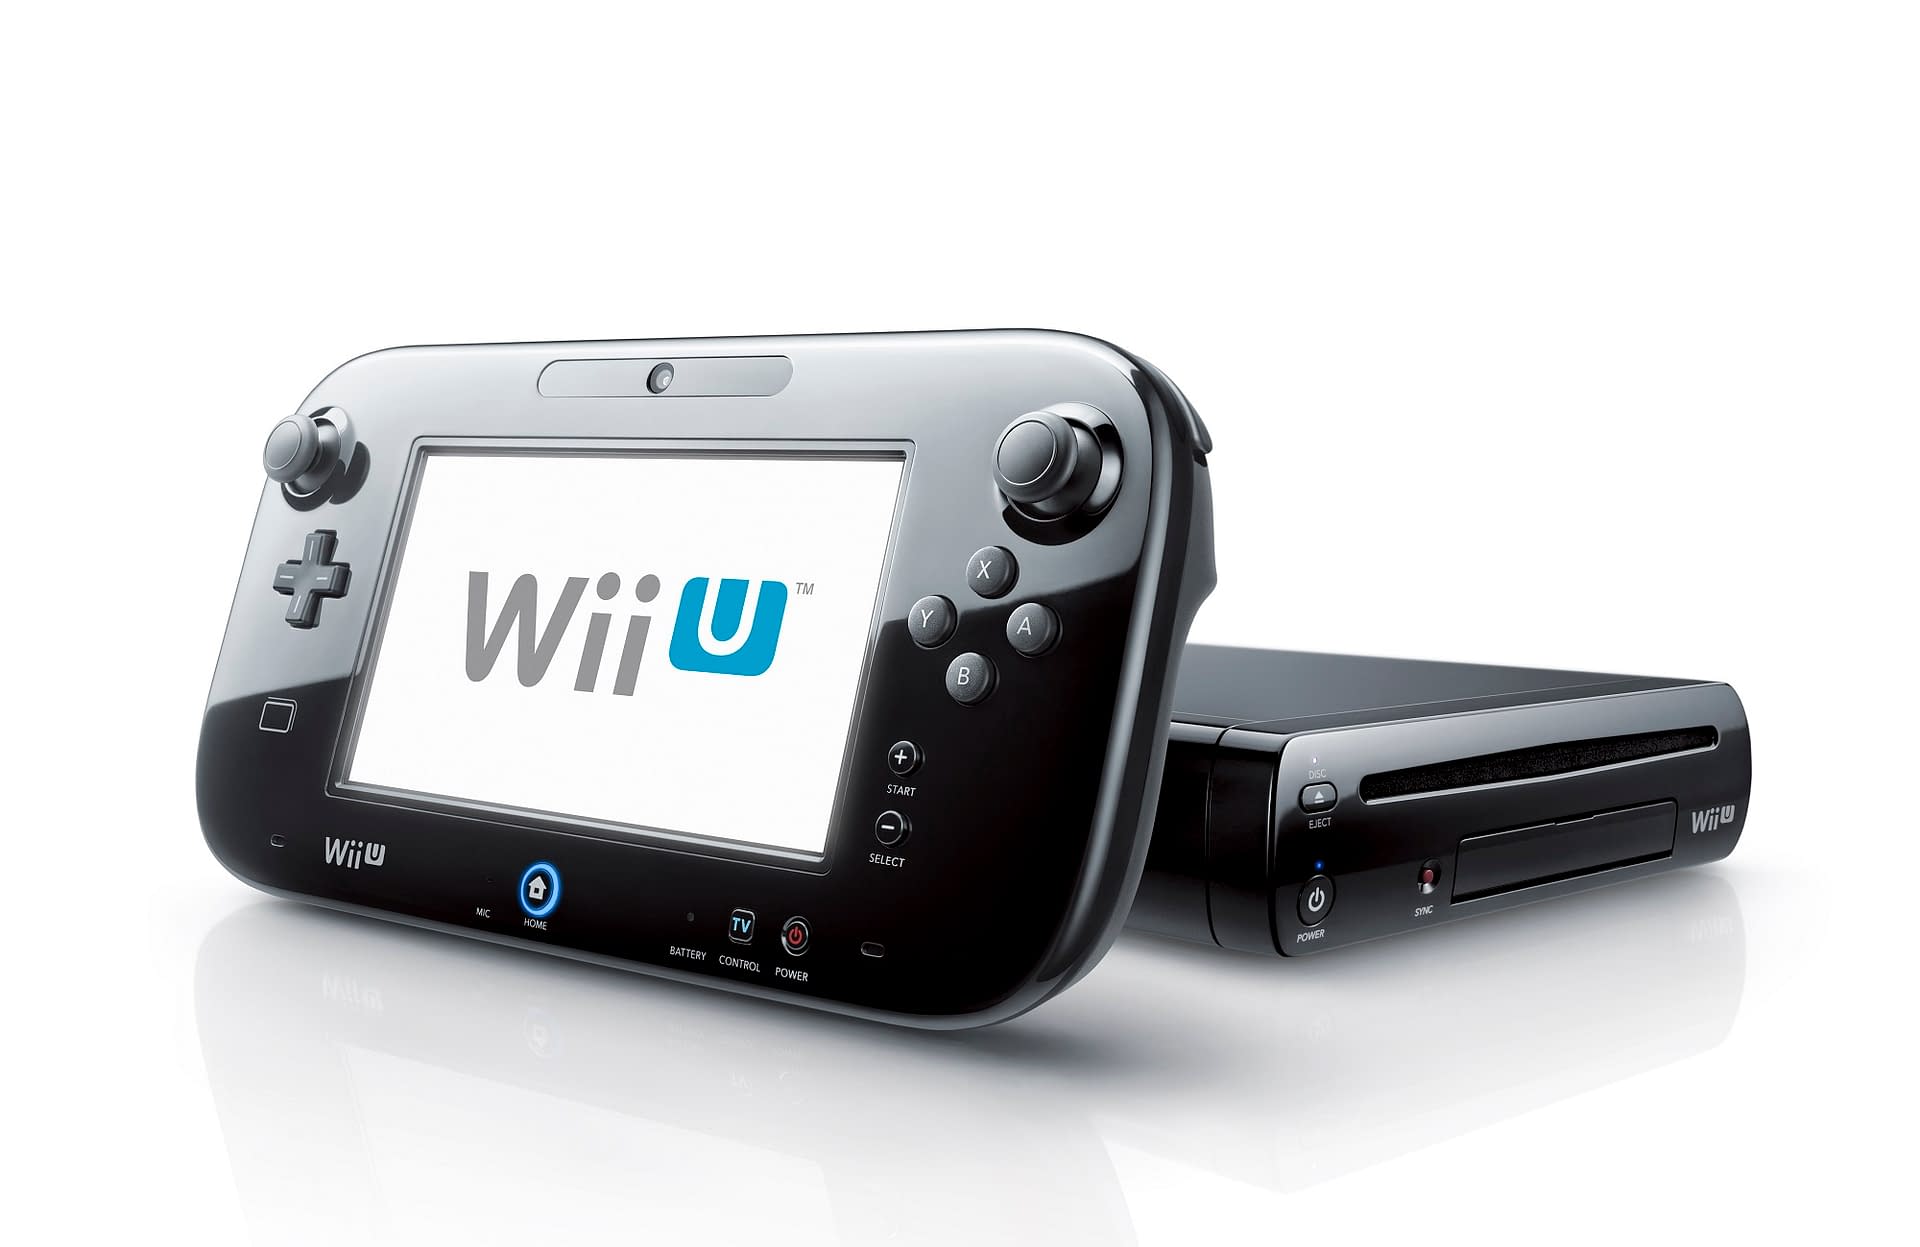 Here's When 3DS And Wii U eShop Purchases End